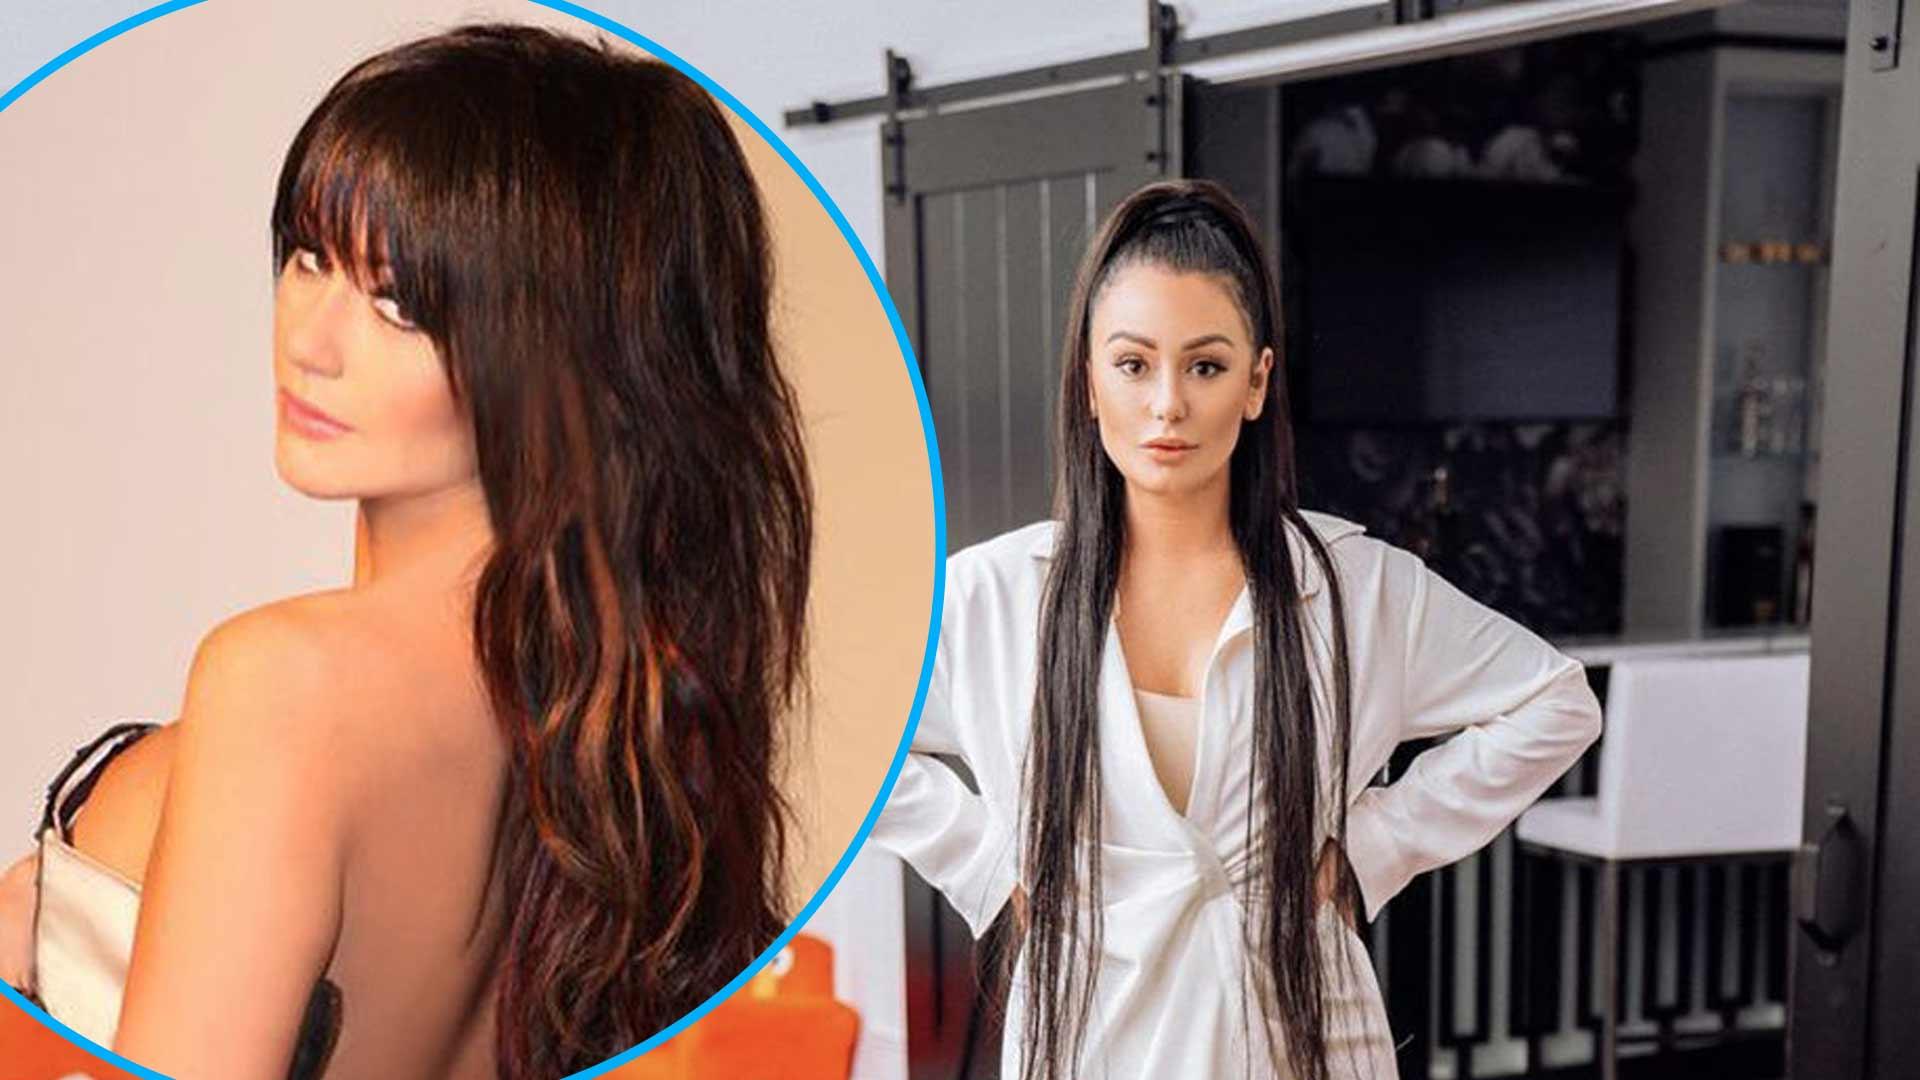 JWoww Shares Sultry Throwback Unzipping The Back Of Her Dress While ‘Stuck At Home’